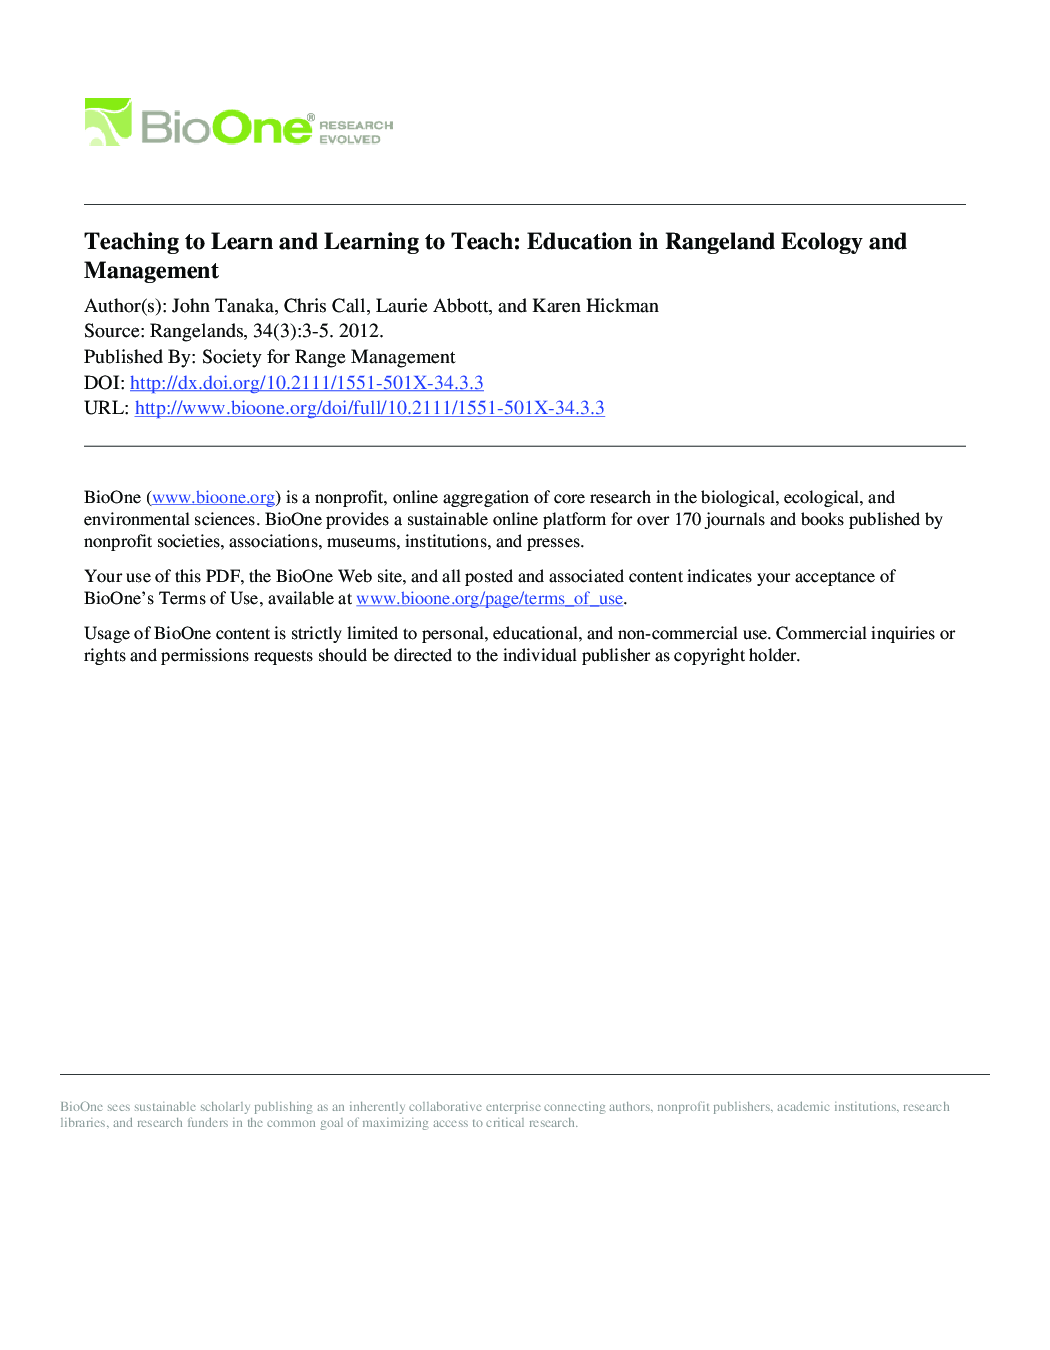 Teaching to Learn and Learning to Teach: Education in Rangeland Ecology and Management